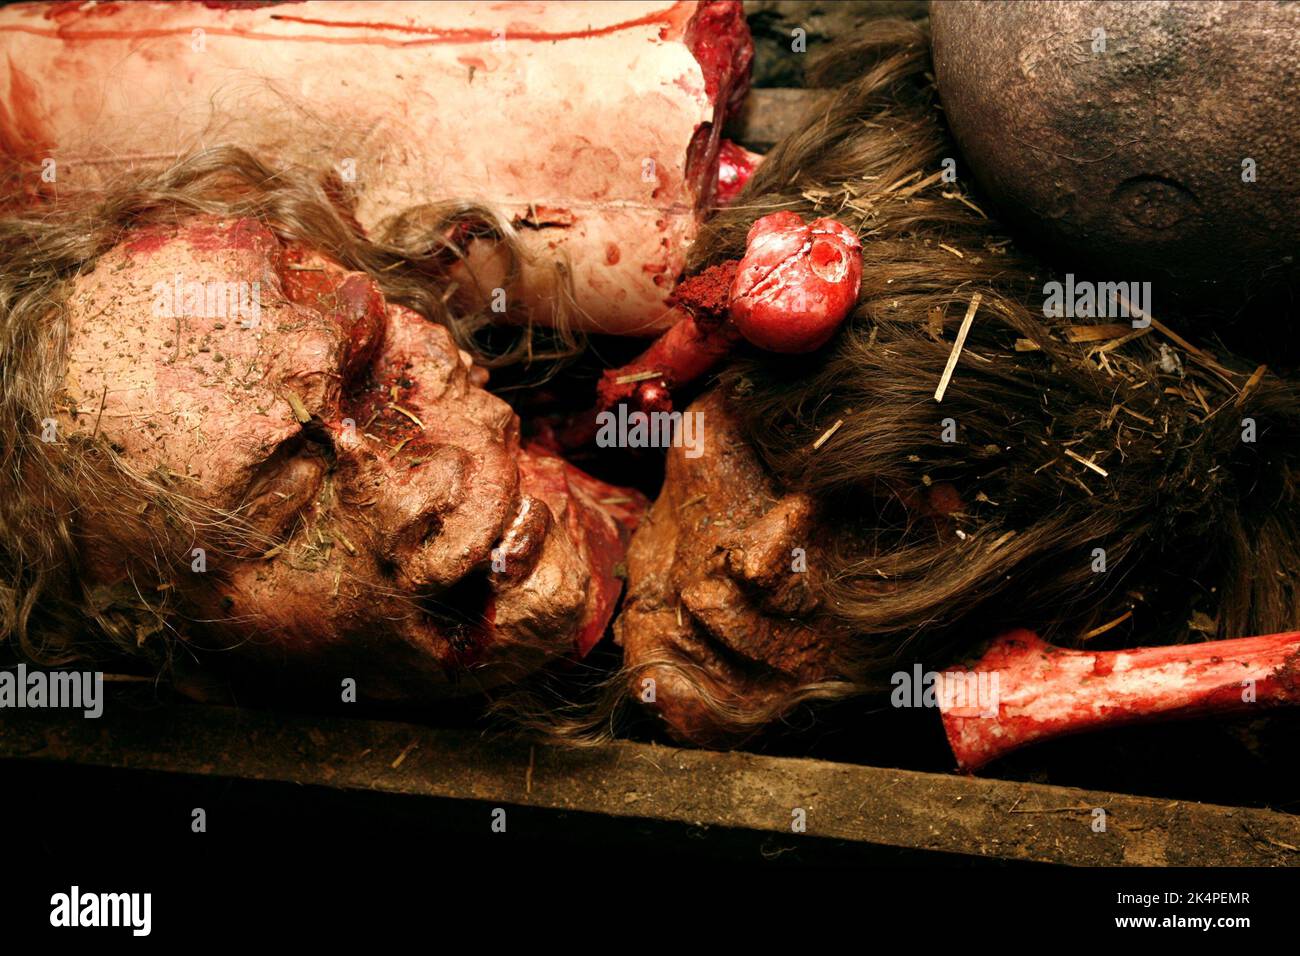 HUMAN REMAINS, THE COTTAGE, 2008 Stock Photo